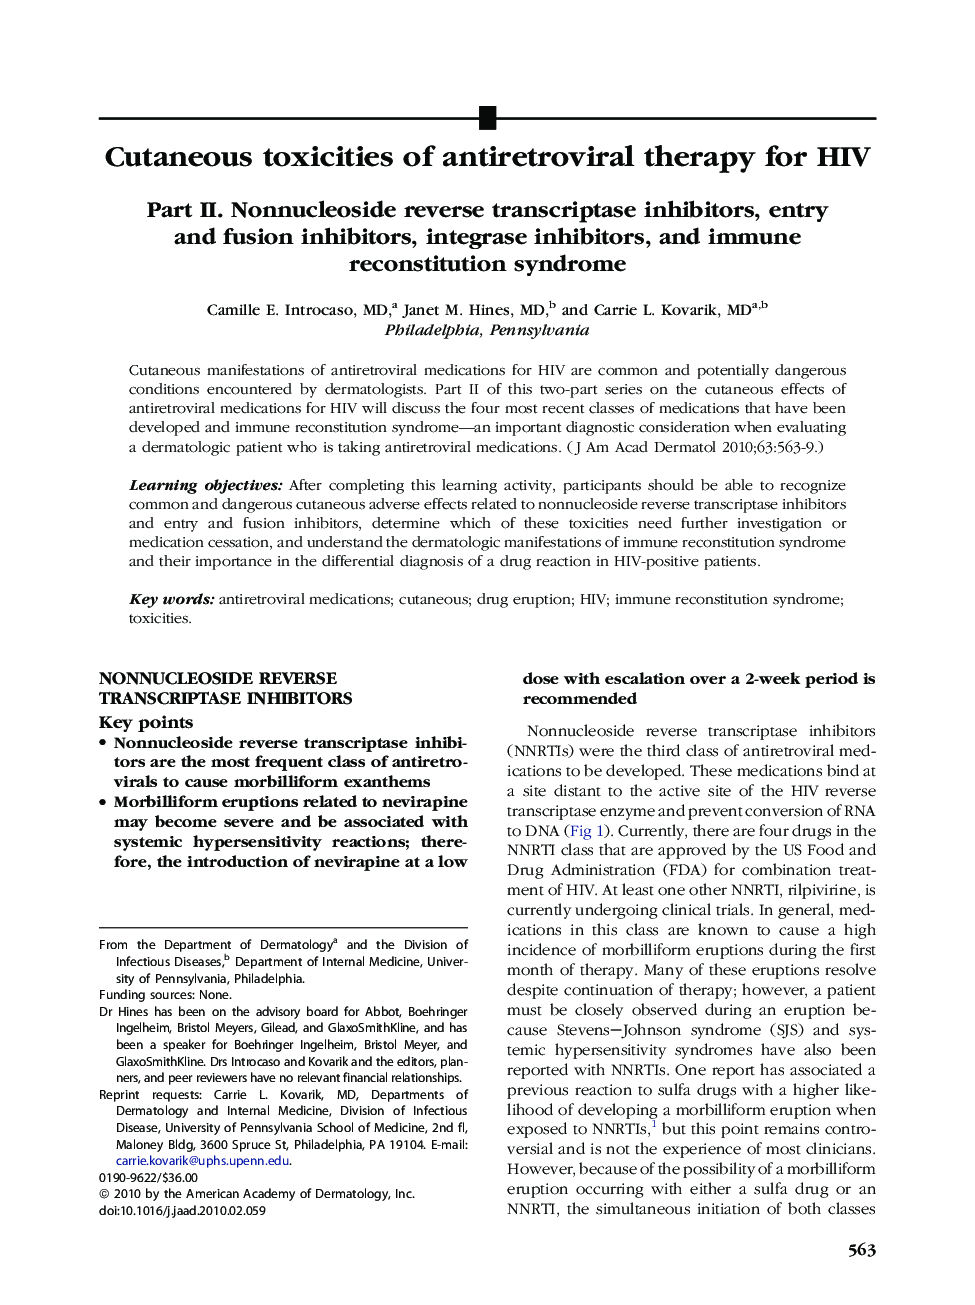 Cutaneous toxicities of antiretroviral therapy for HIV : Part II. Nonnucleoside reverse transcriptase inhibitors, entry and fusion inhibitors, integrase inhibitors, and immune reconstitution syndrome